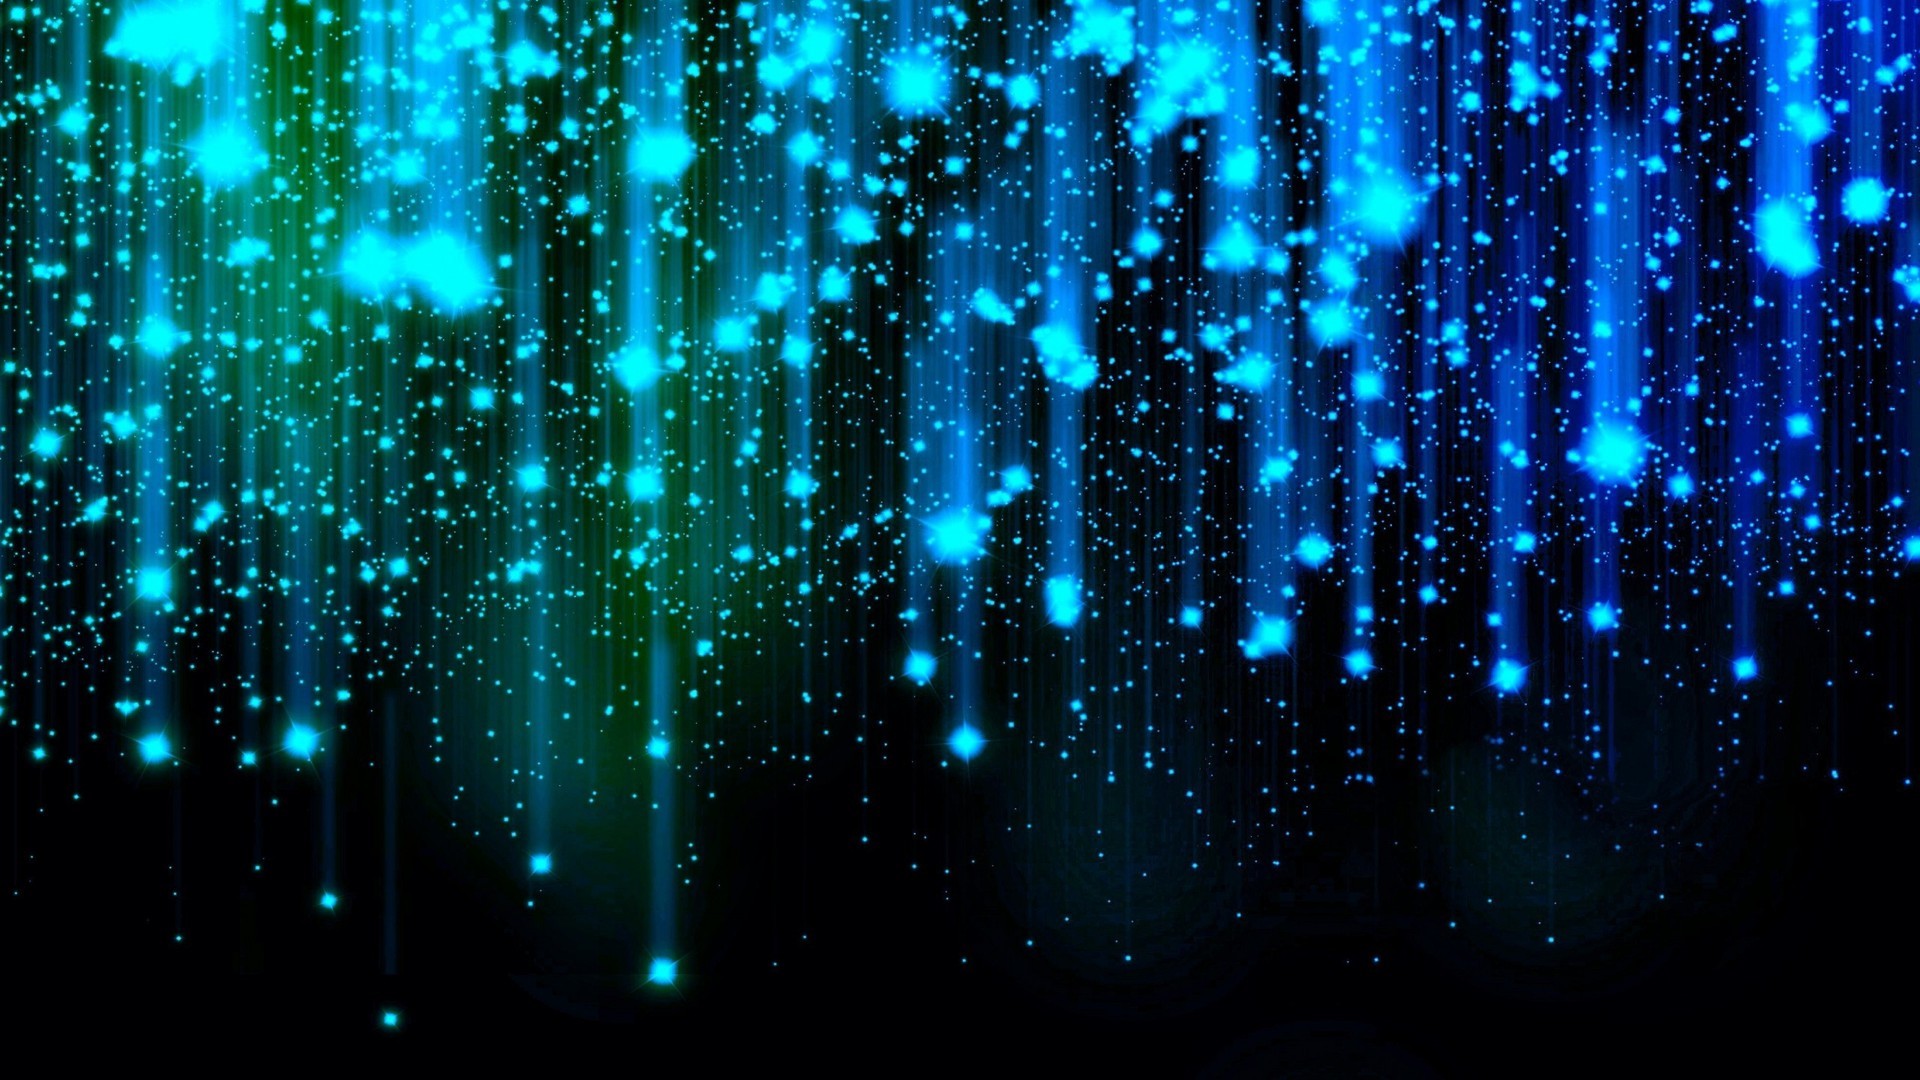 1920x1080 Abstract stars falling images HD.